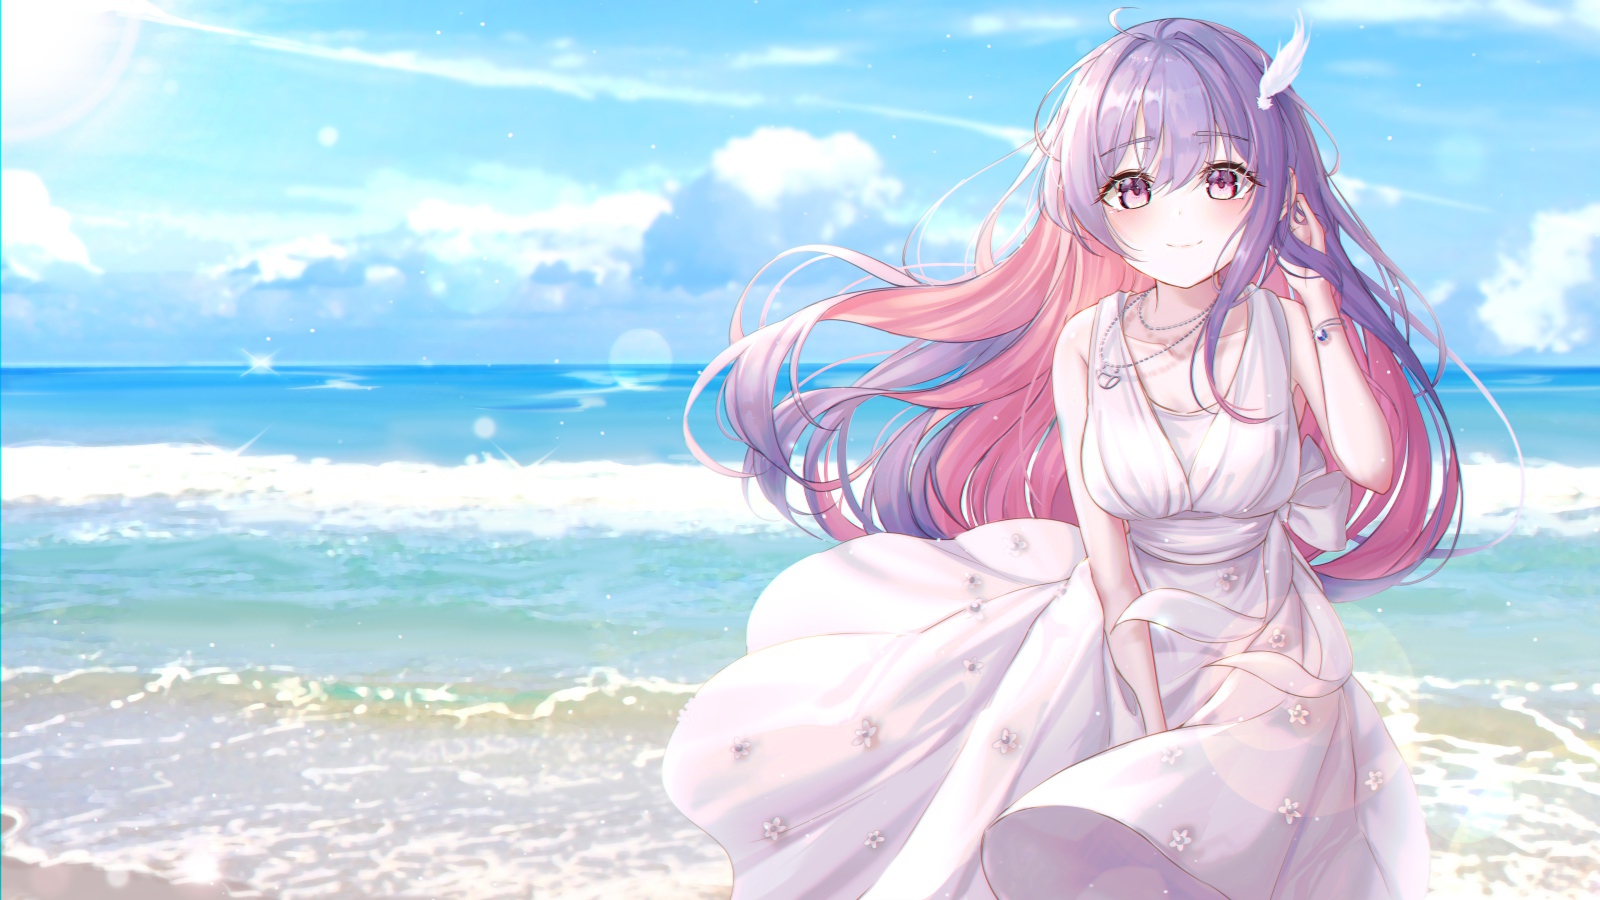 Long-haired anime girl with a white dress by the sea